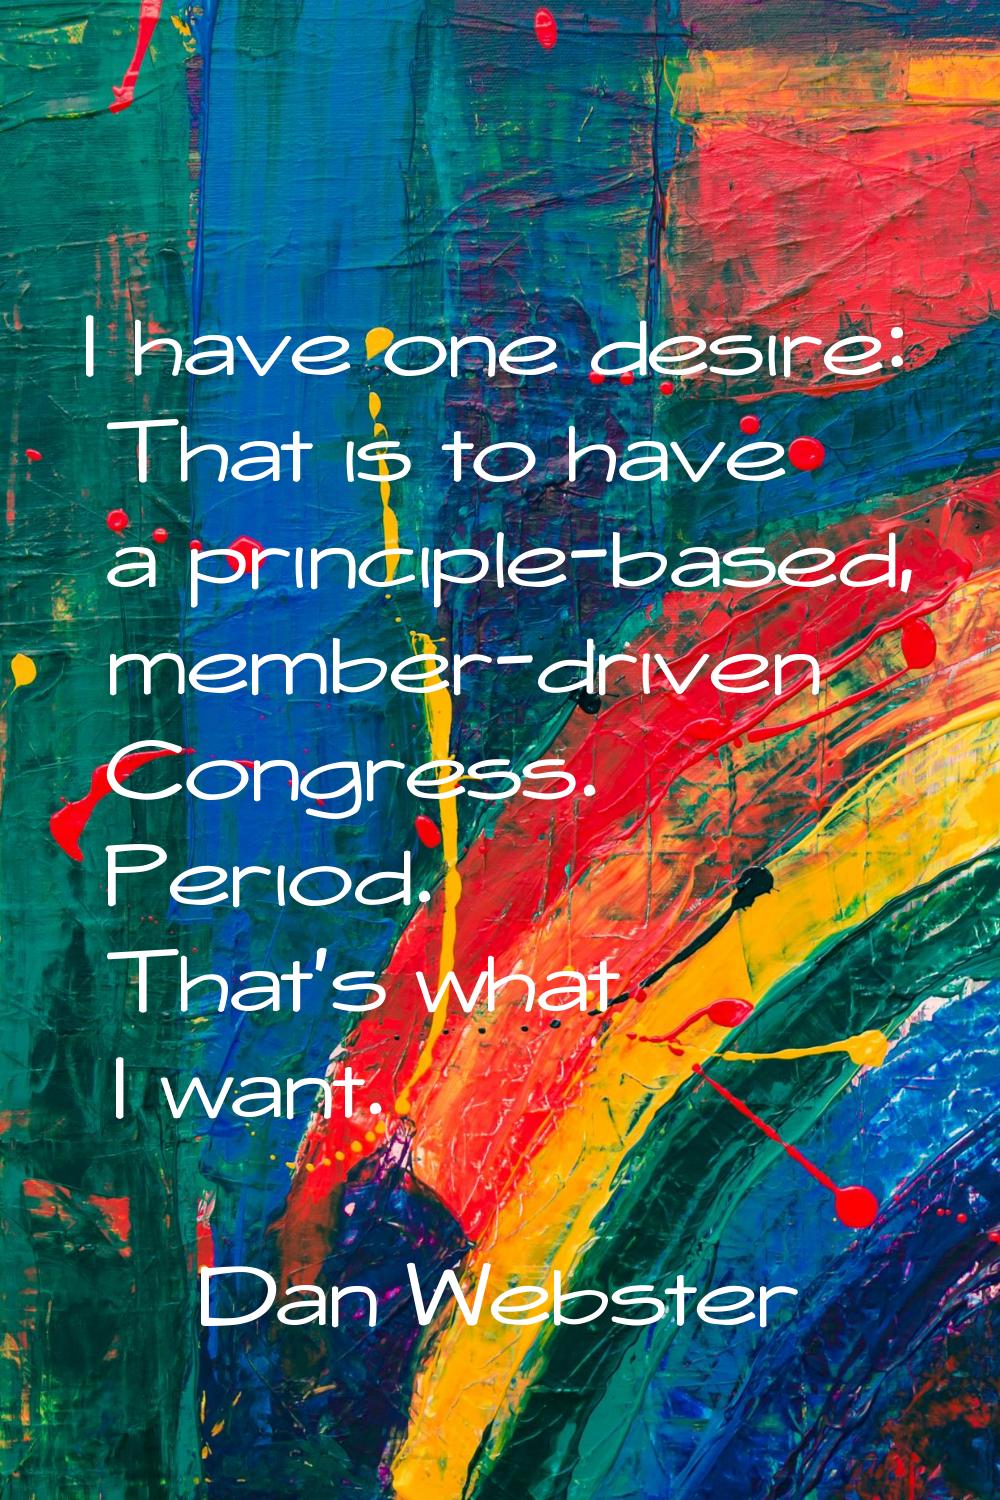 I have one desire: That is to have a principle-based, member-driven Congress. Period. That's what I